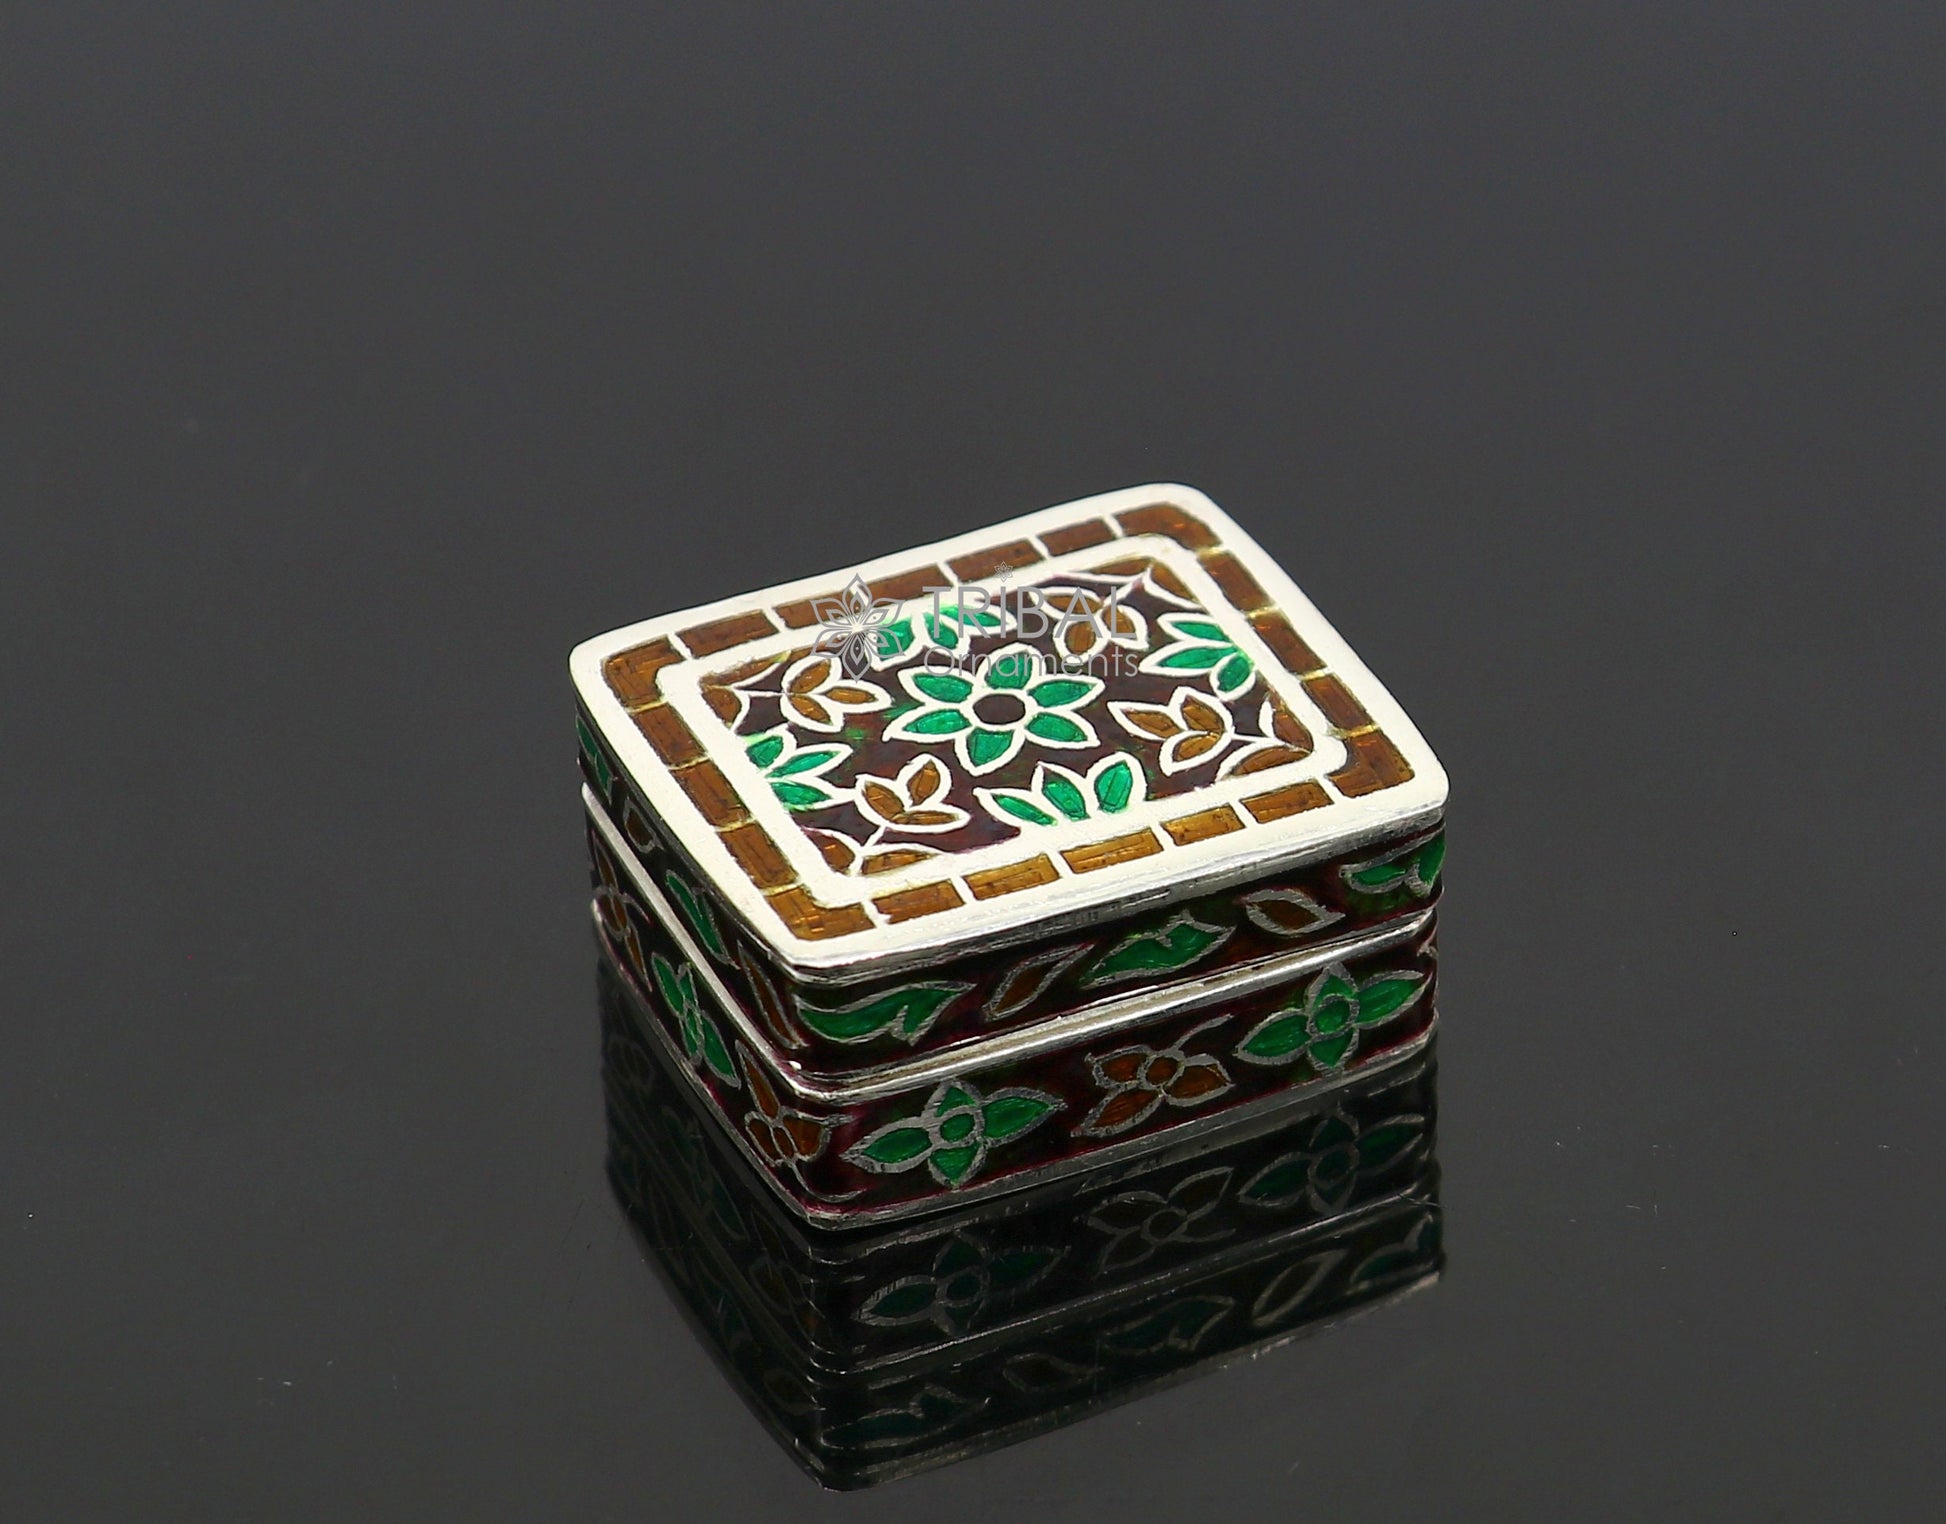 Trendy cultural style 925 sterling silver trinket box, casket box, container, Sindoor box vintage design enamel brides jewelry stb770 - TRIBAL ORNAMENTS